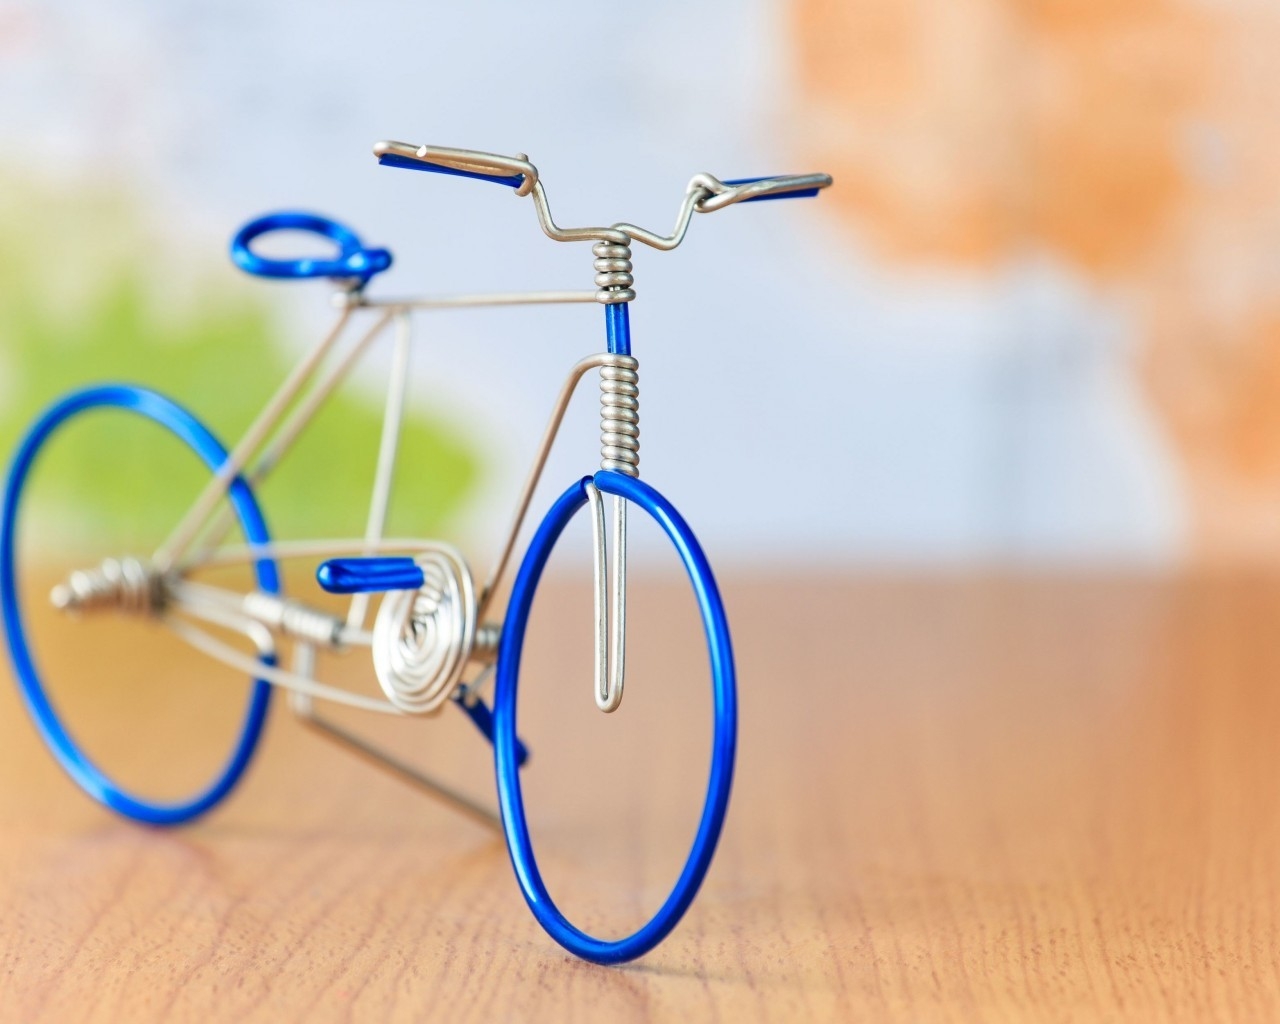 Handmade Bicycle for 1280 x 1024 resolution